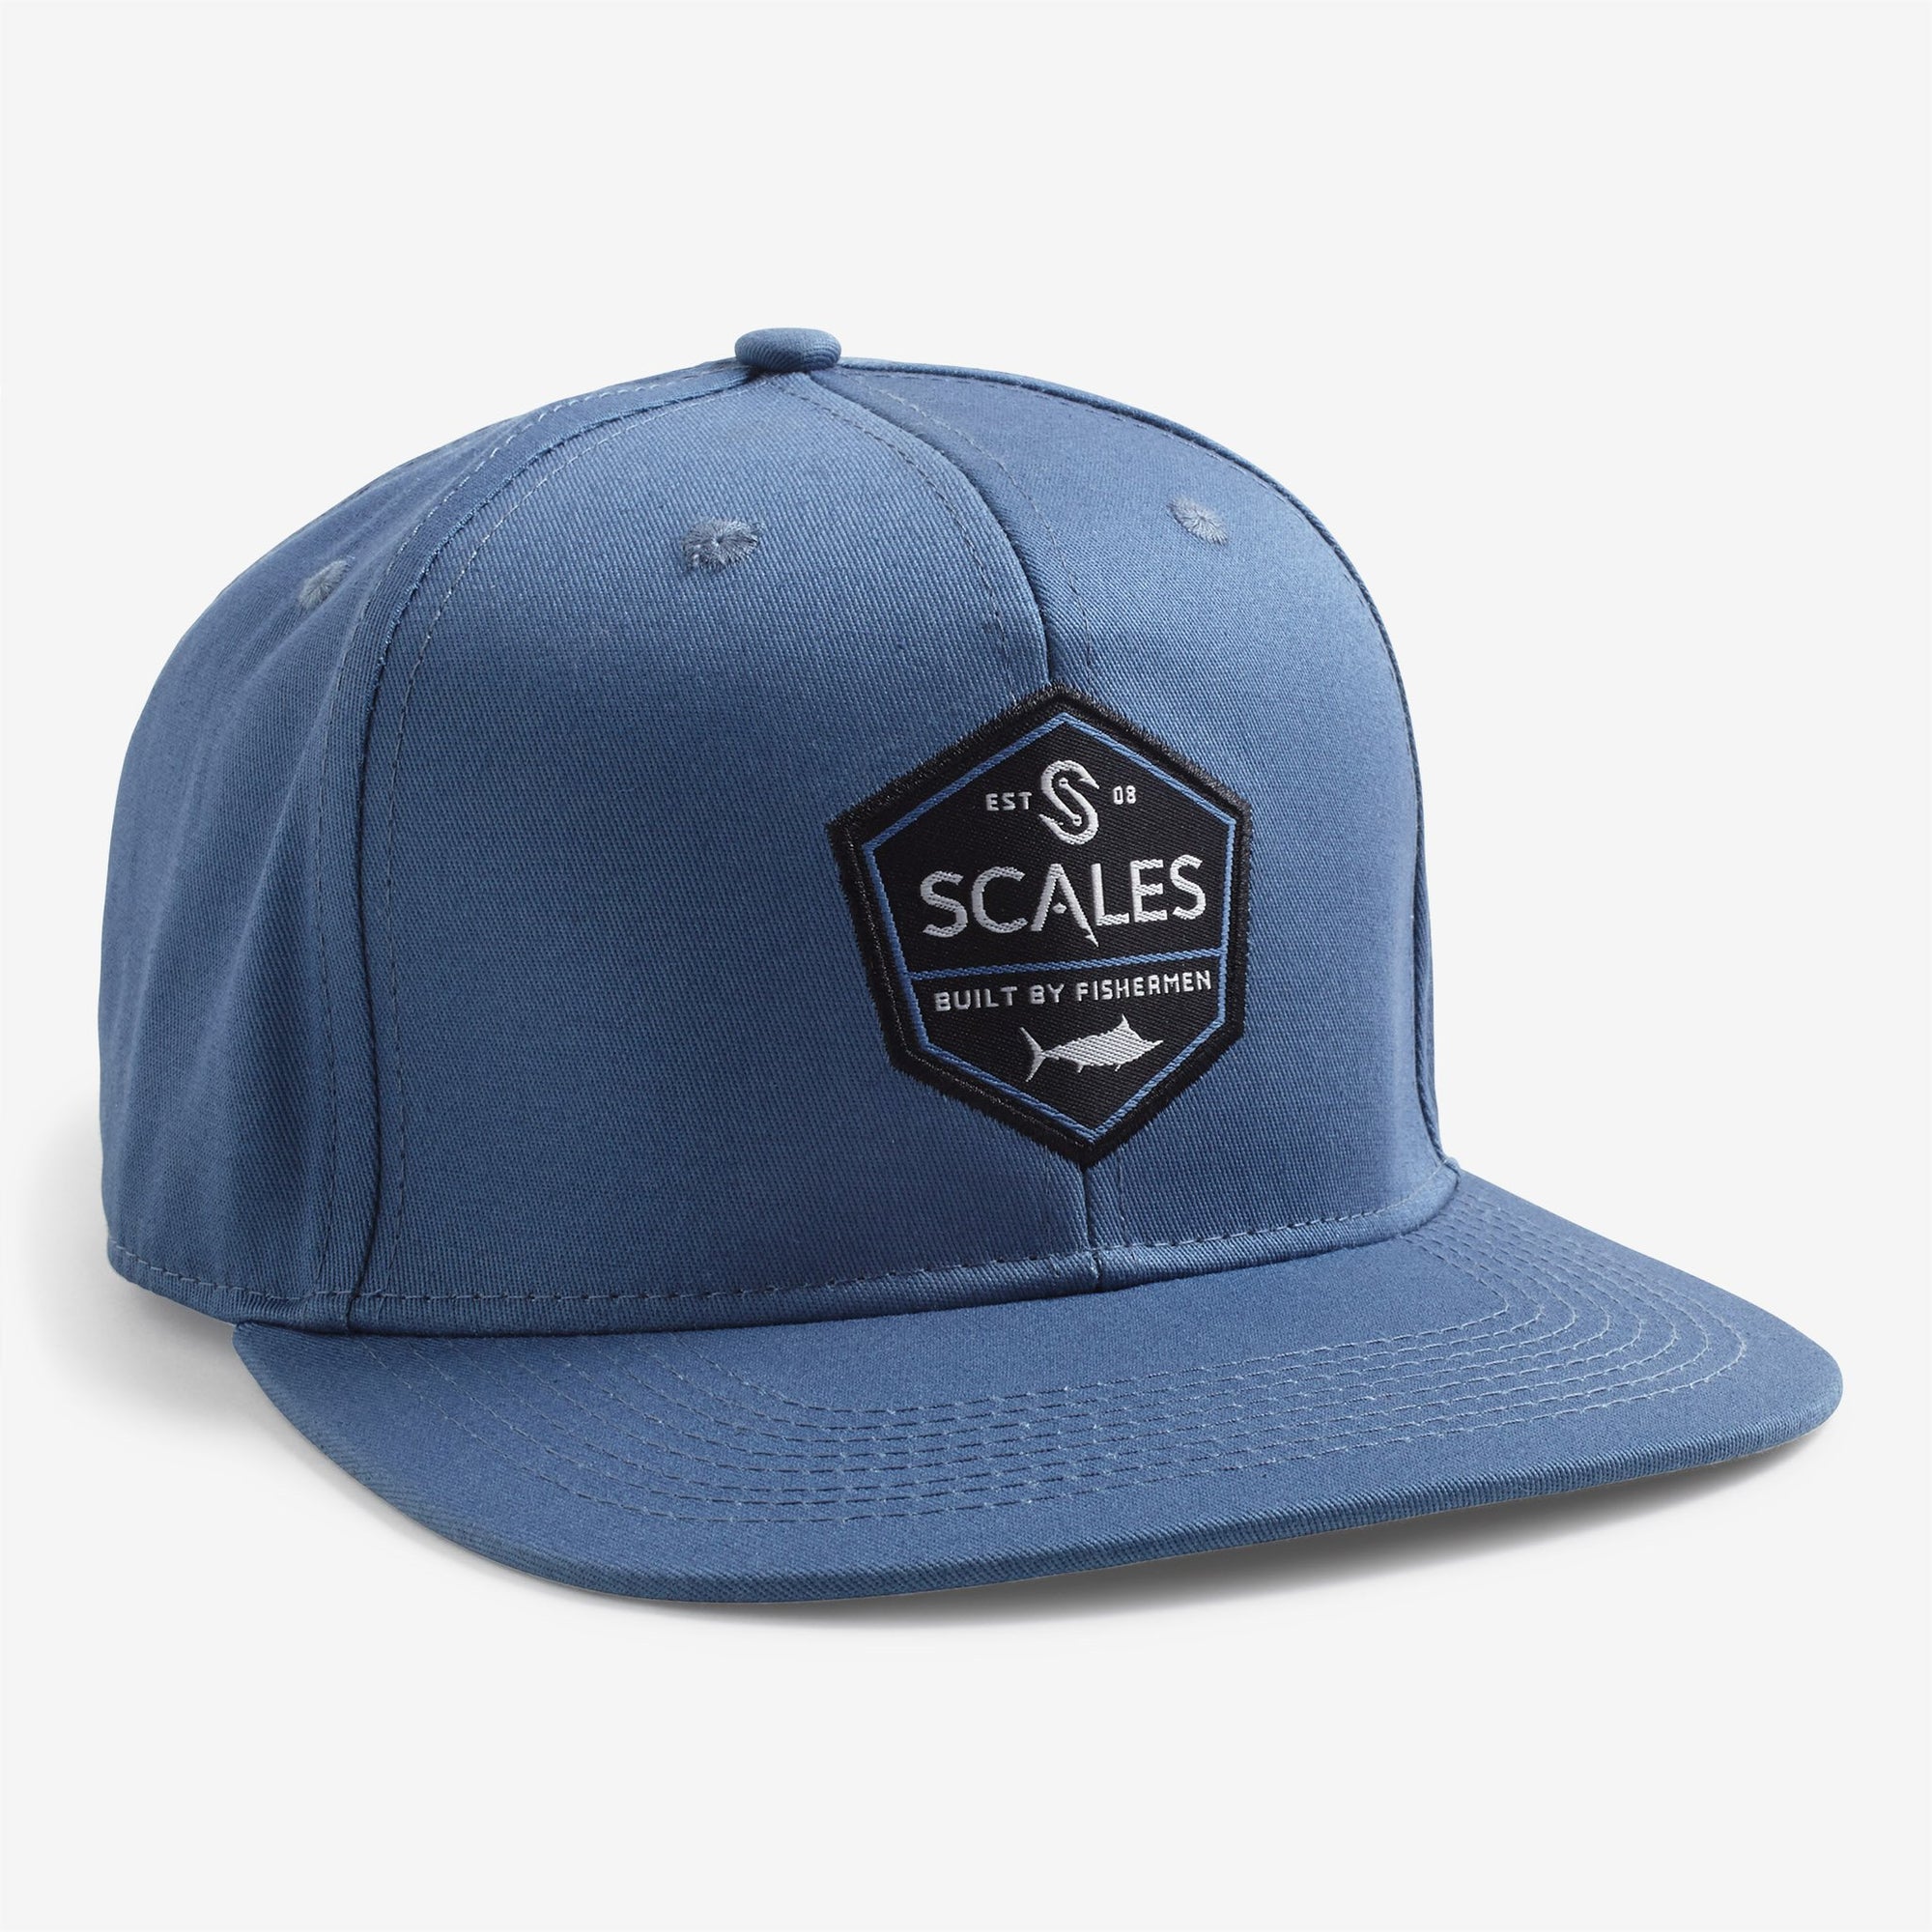 Scales Gear Built By Fisherman Snapback Blue Cap Front